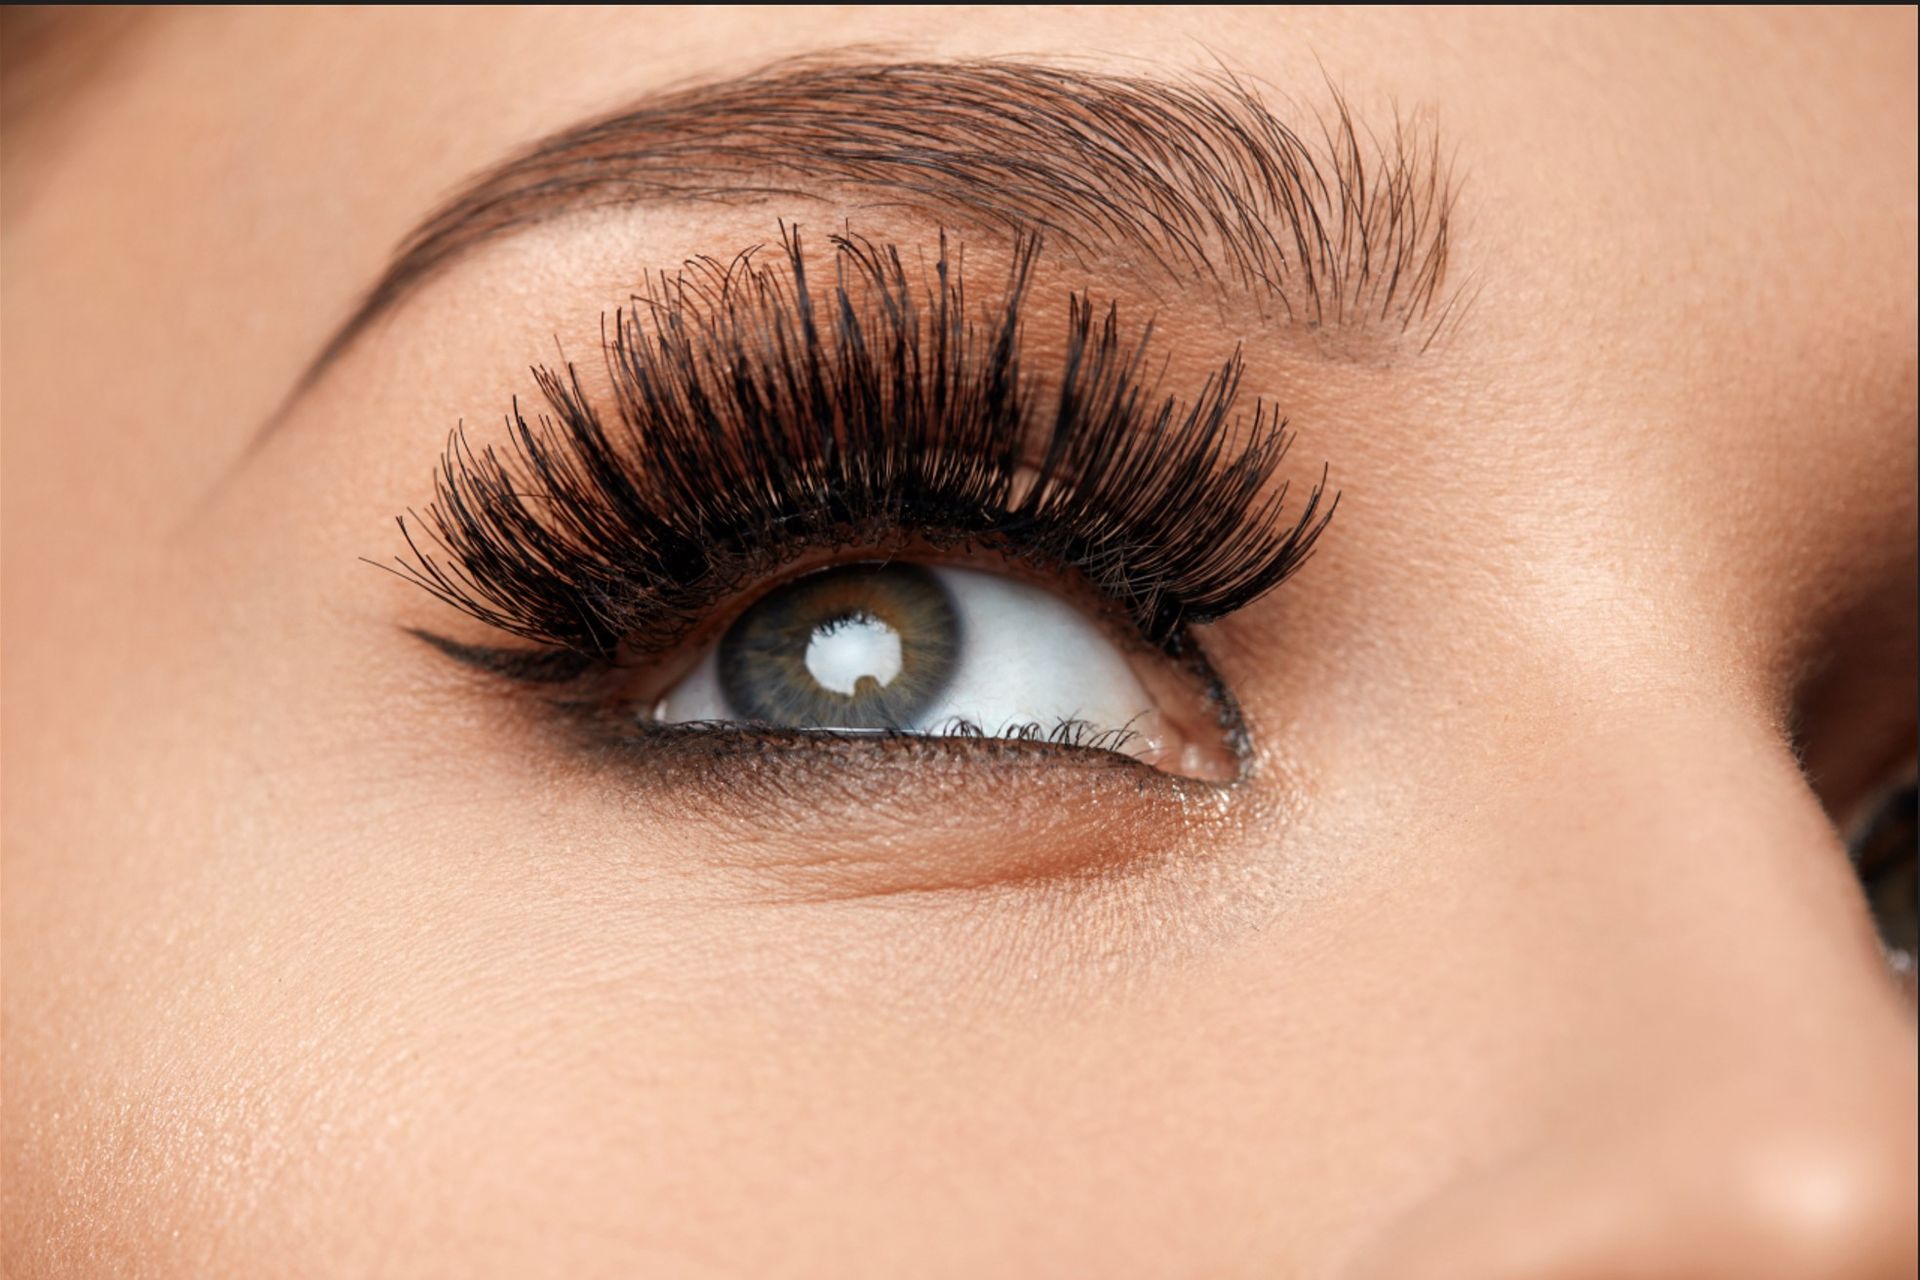 A close up of a woman 's eye with long eyelashes.